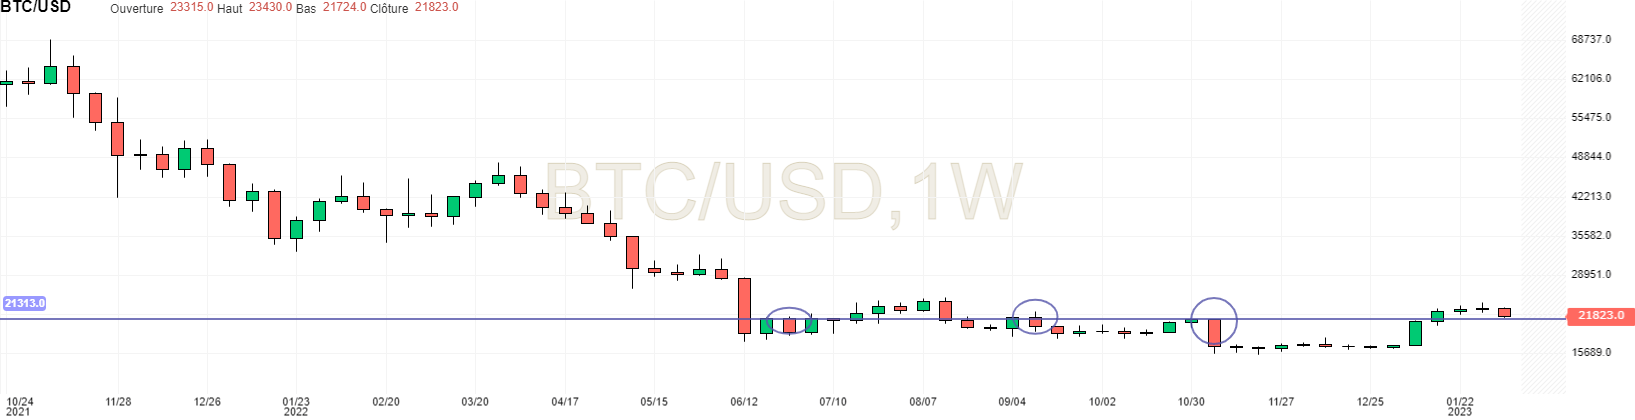 BTC price in weekly unit